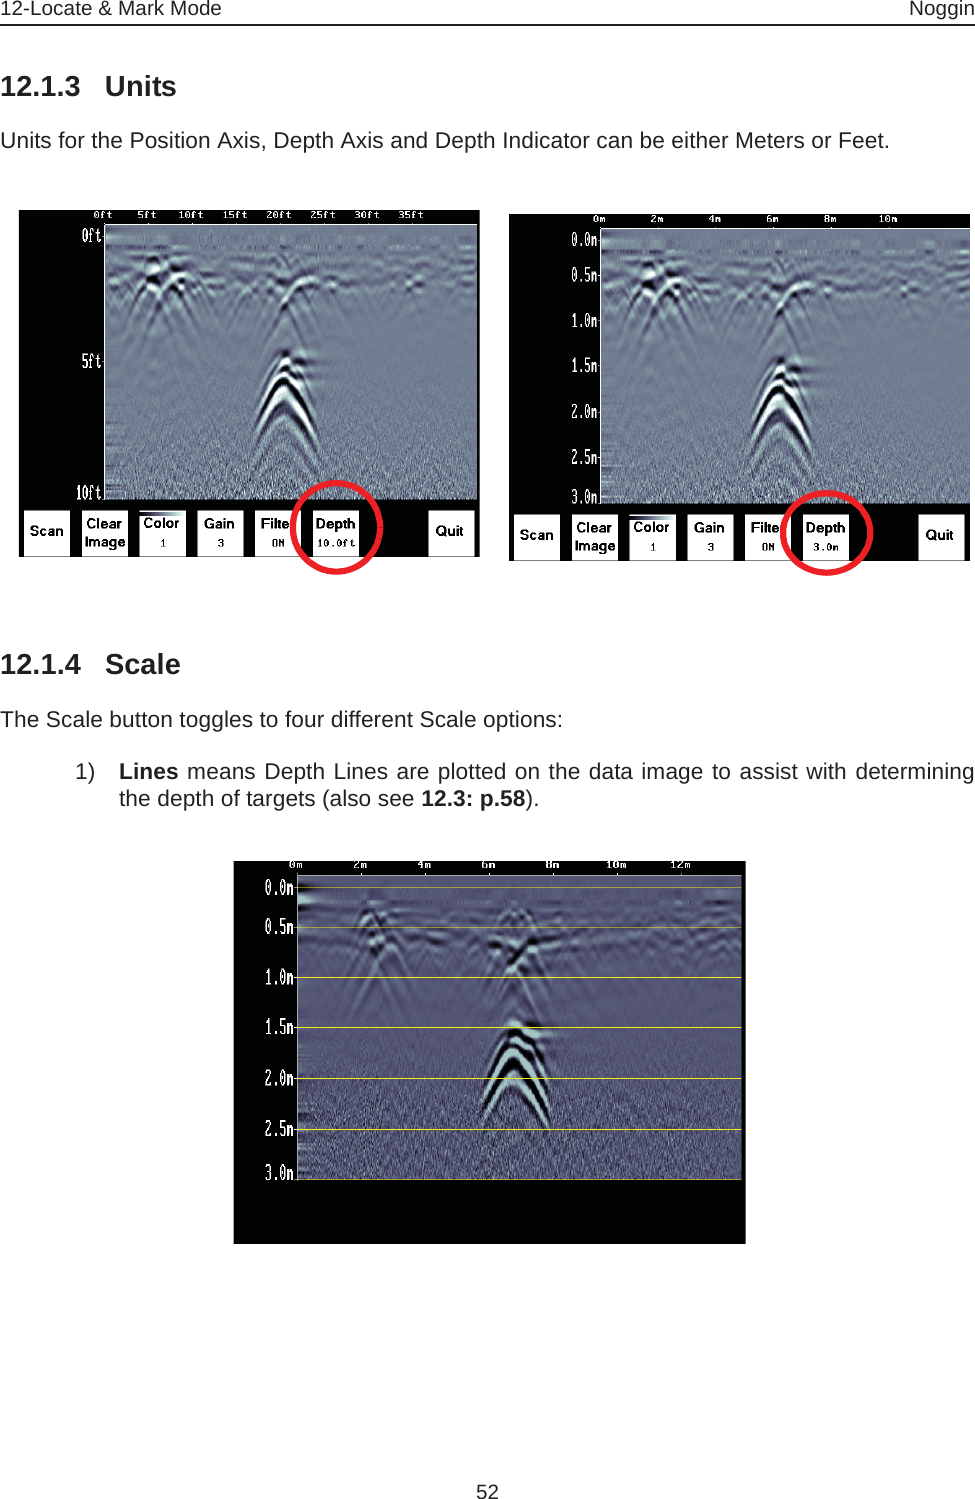 12-Locate &amp; Mark Mode Noggin5212.1.3 UnitsUnits for the Position Axis, Depth Axis and Depth Indicator can be either Meters or Feet.12.1.4 ScaleThe Scale button toggles to four different Scale options:1) Lines means Depth Lines are plotted on the data image to assist with determiningthe depth of targets (also see 12.3: p.58).